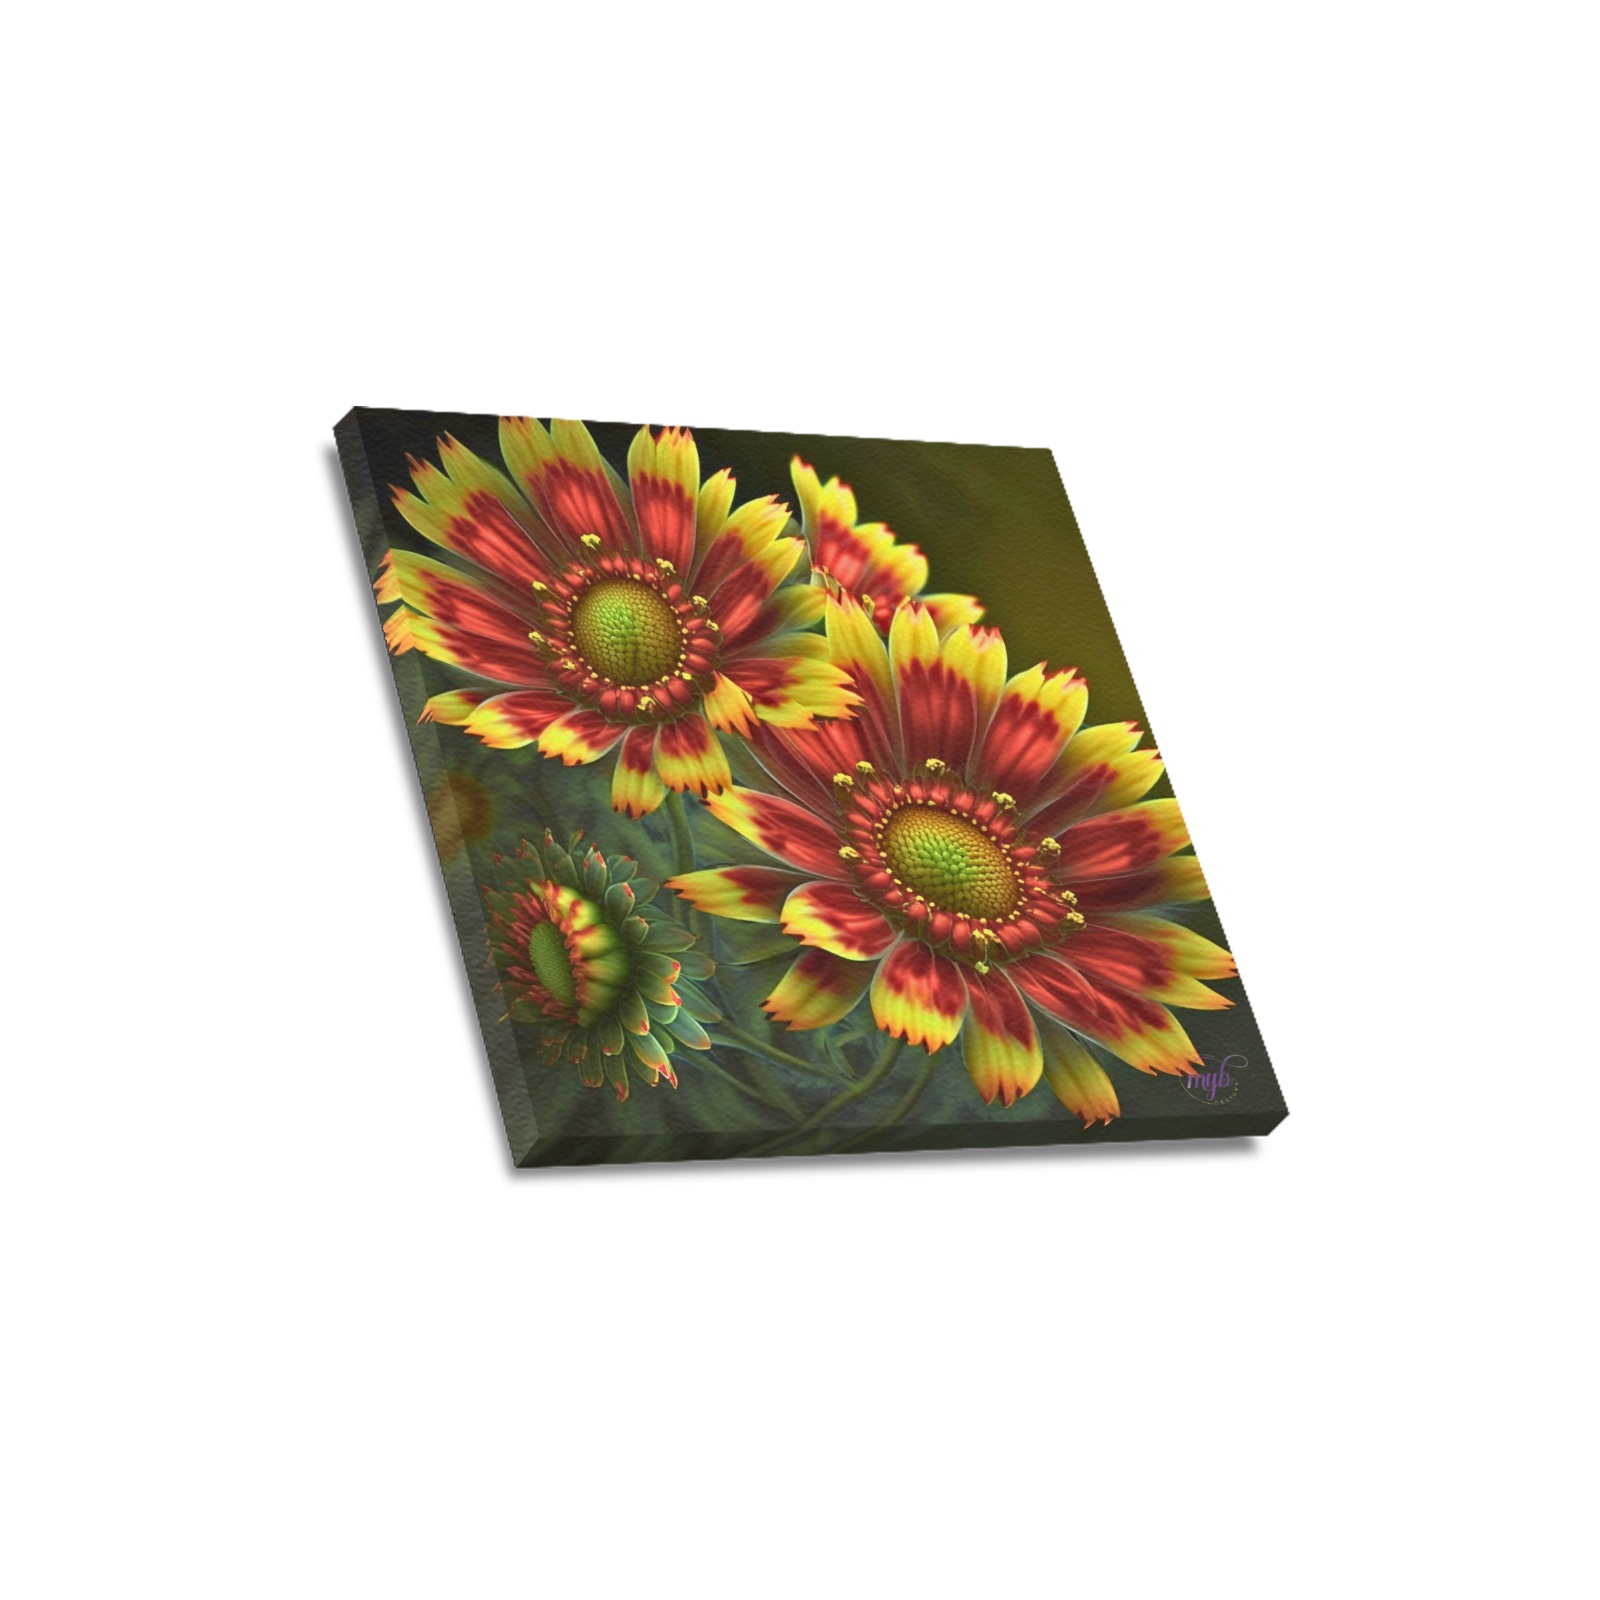 April Showers bring May Flowers Upgraded Canvas Print 16"x16"